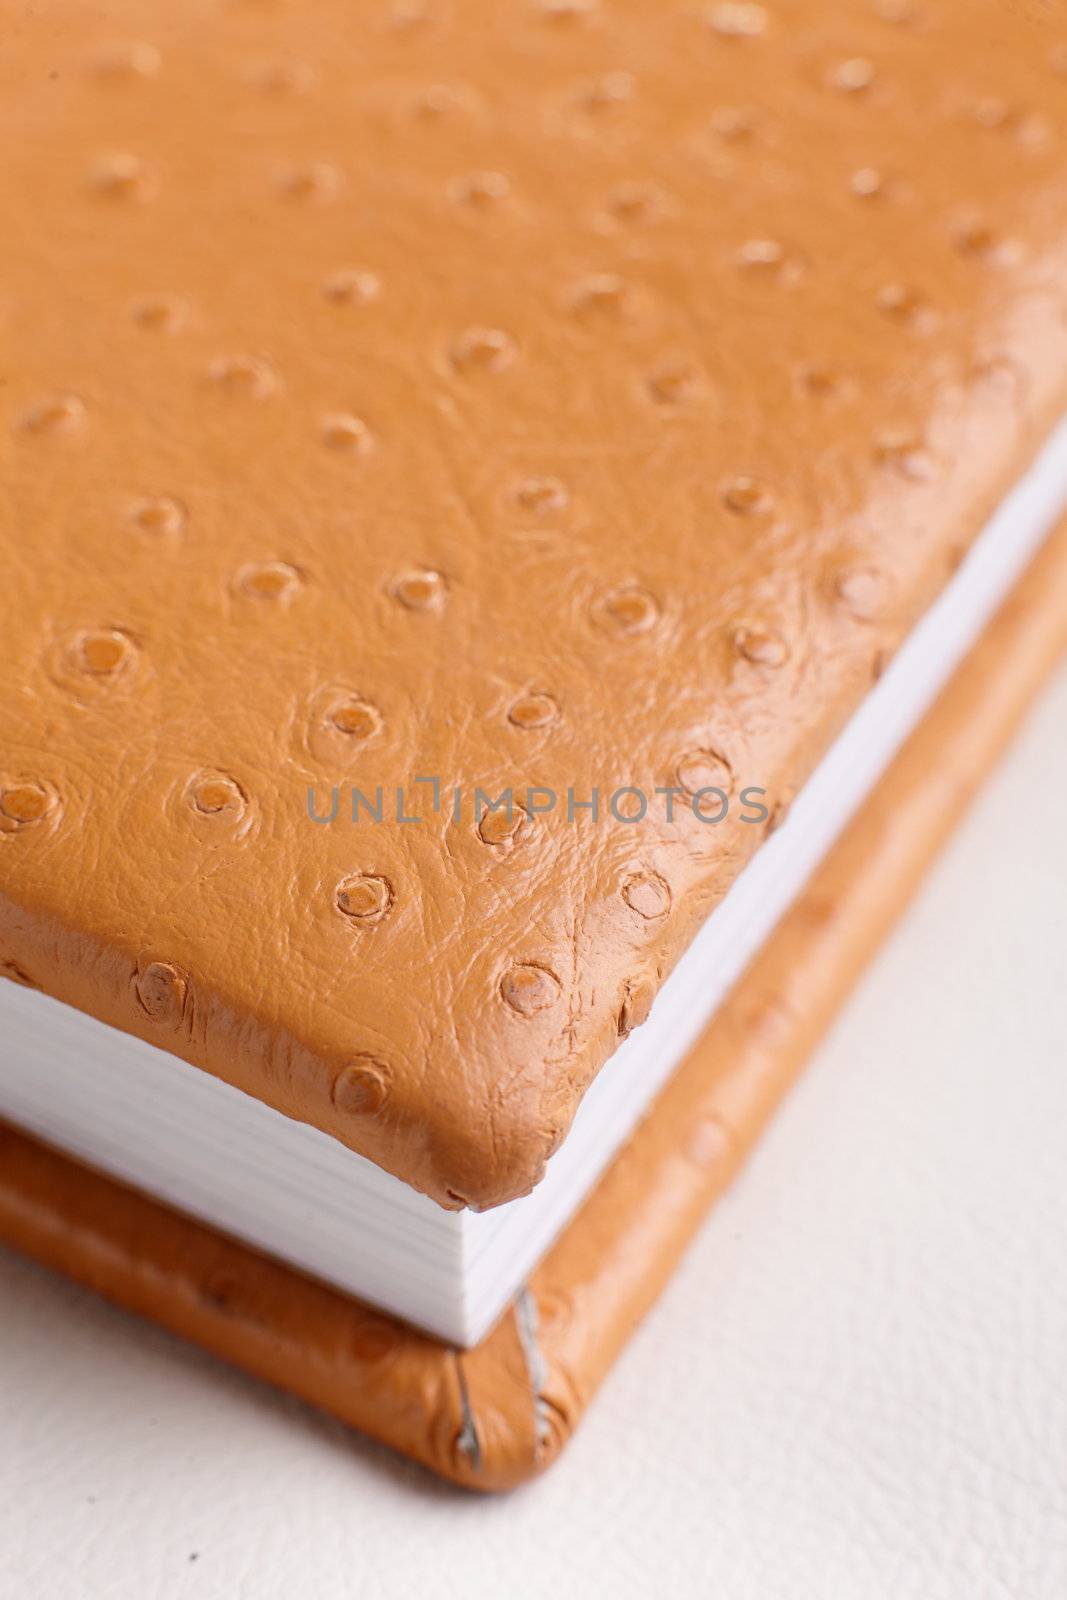 orange book by fiphoto